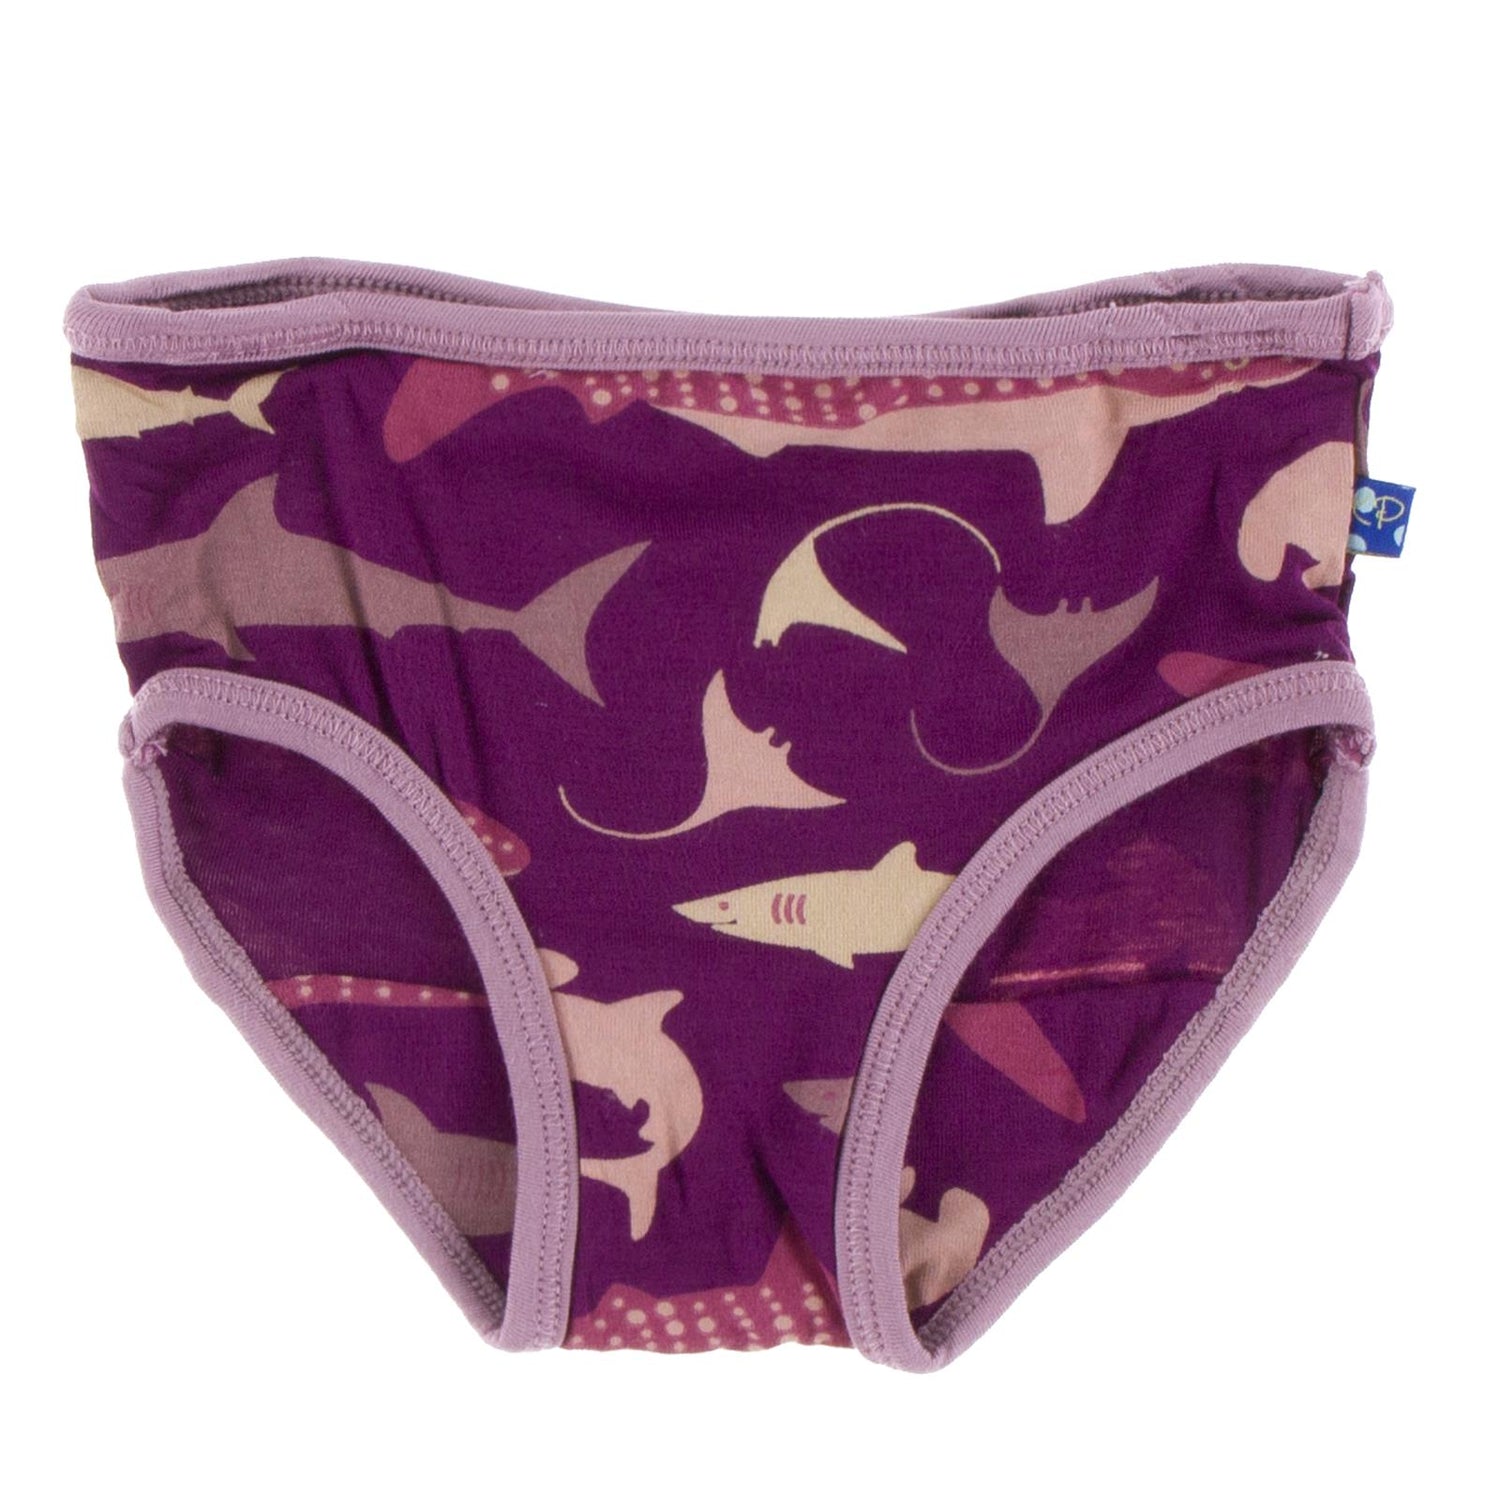 Print Underwear in Melody Sharks with Pegasus Trim